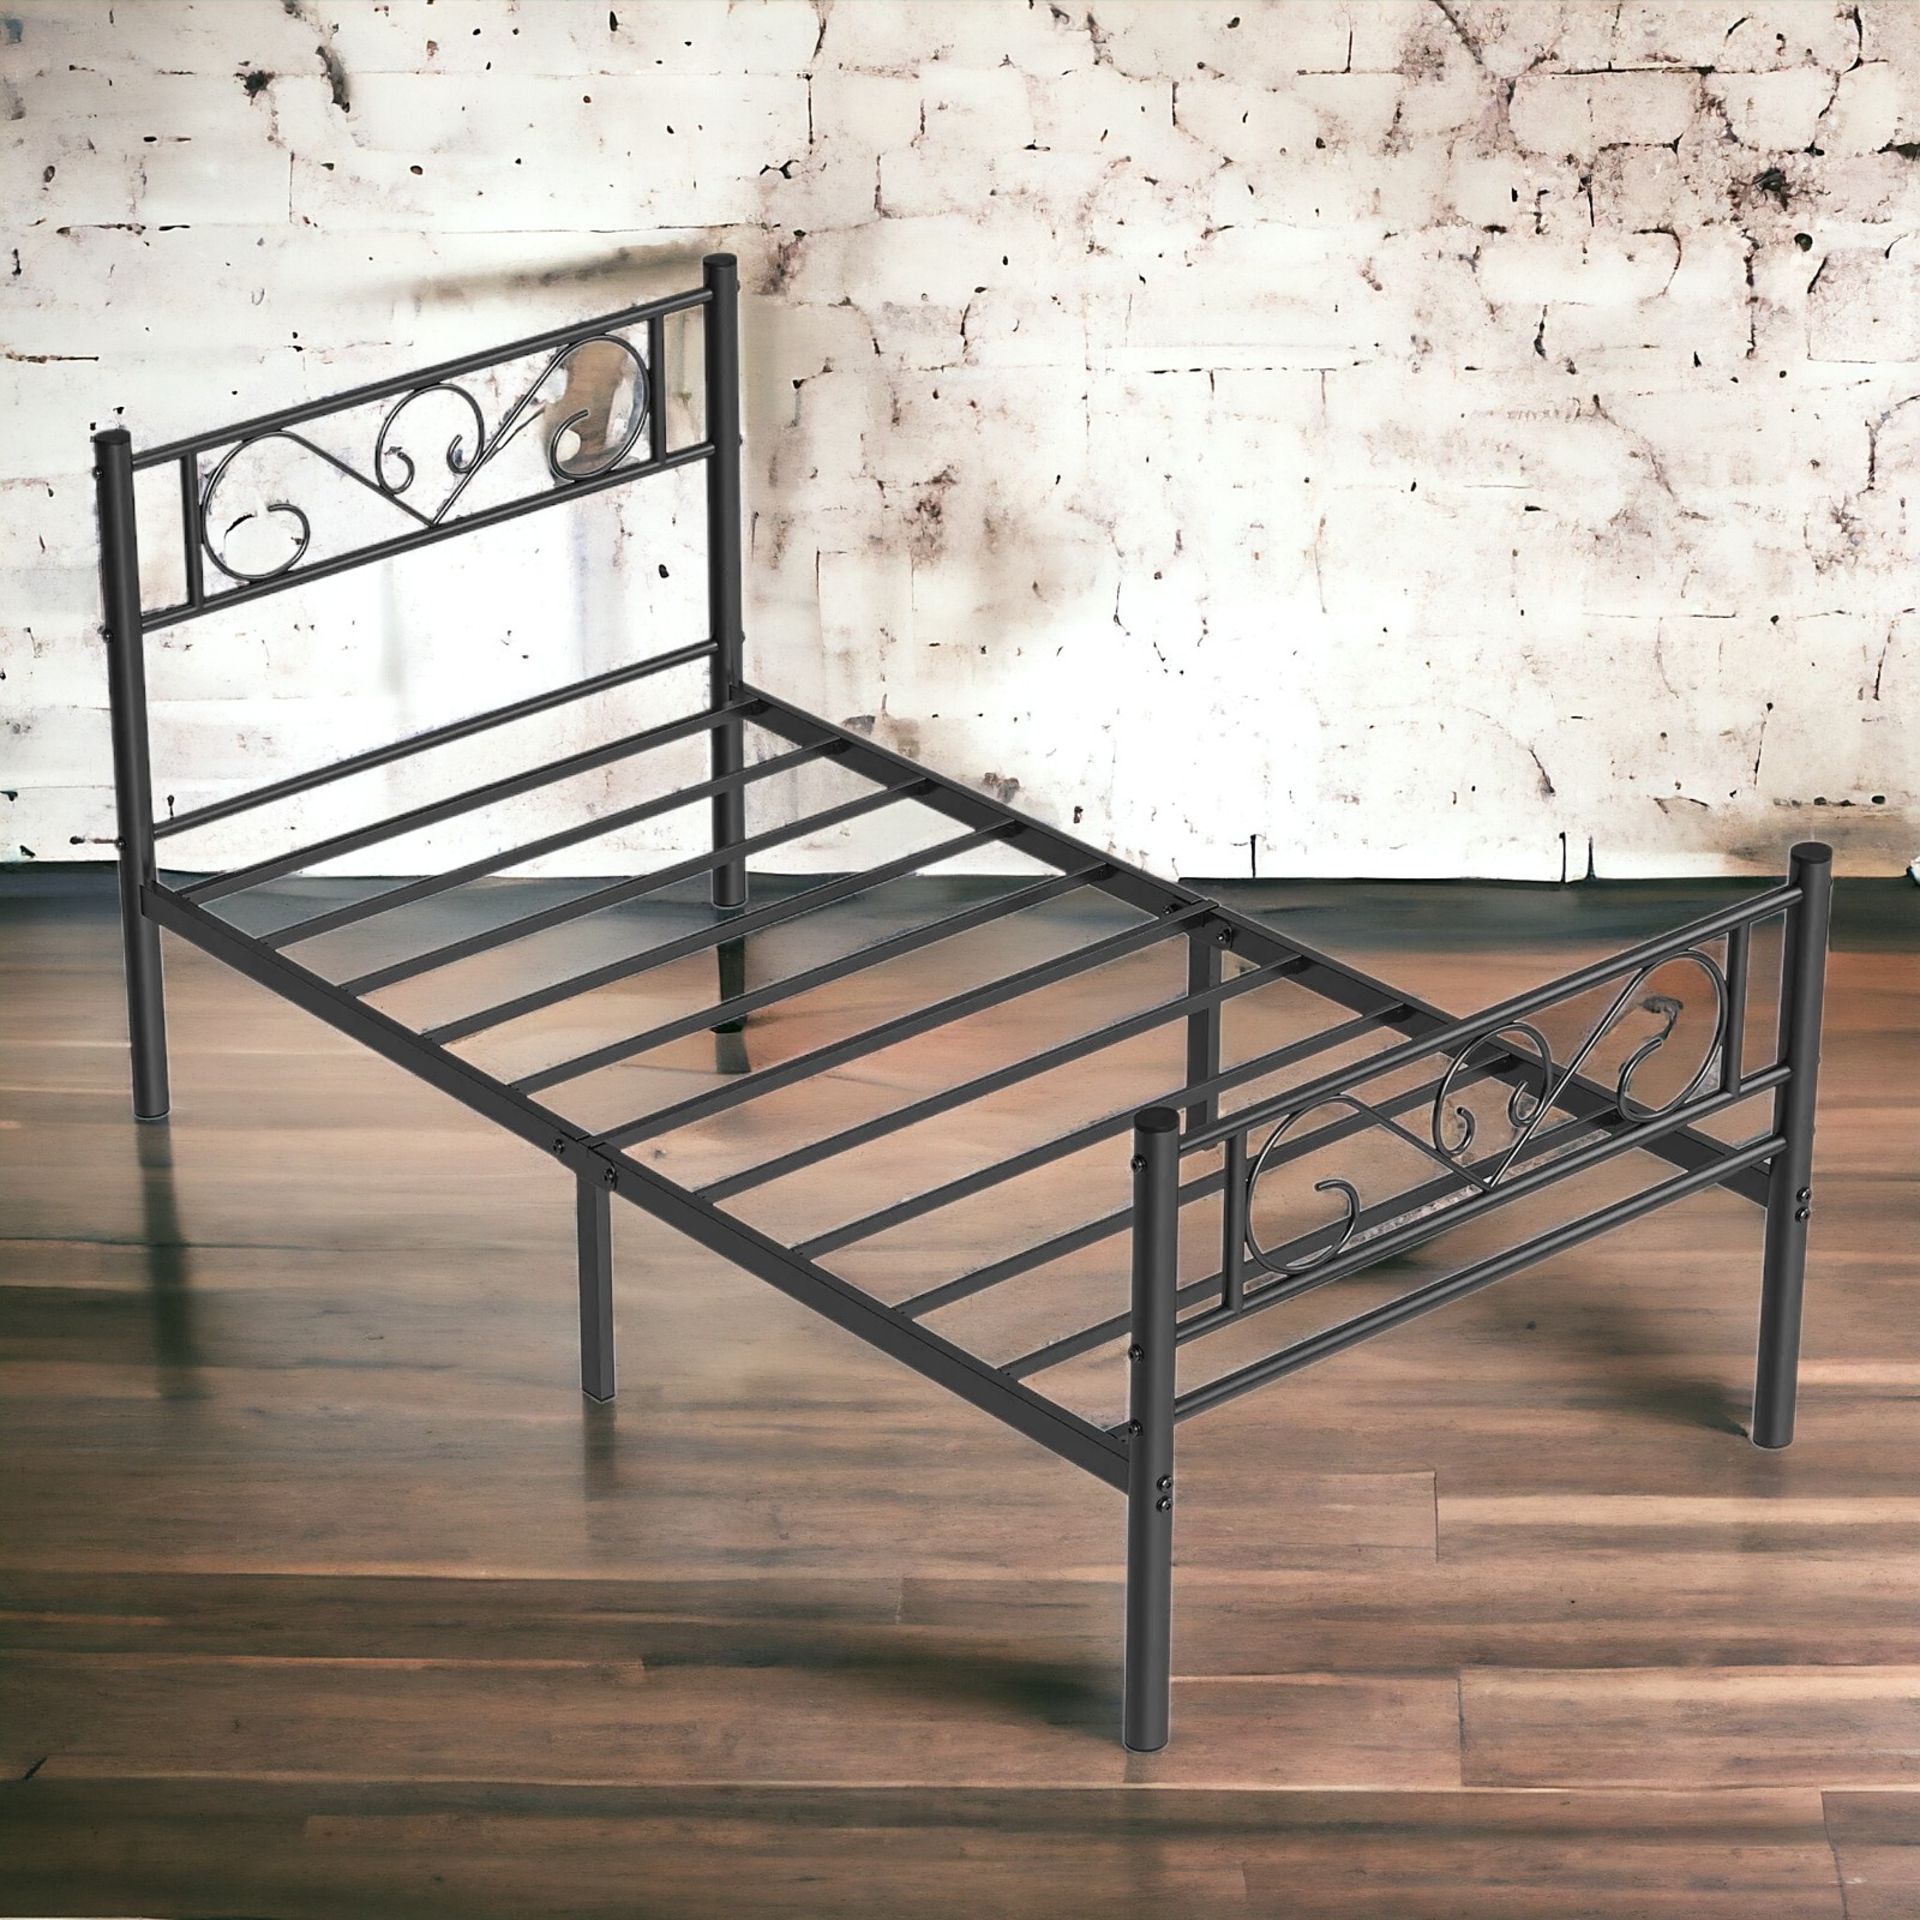 FREE DELIVERY - BRAND NEW SINGLE BED FRAME METAL BED FRAME, FITS 90 X 190 CM MATTRESS